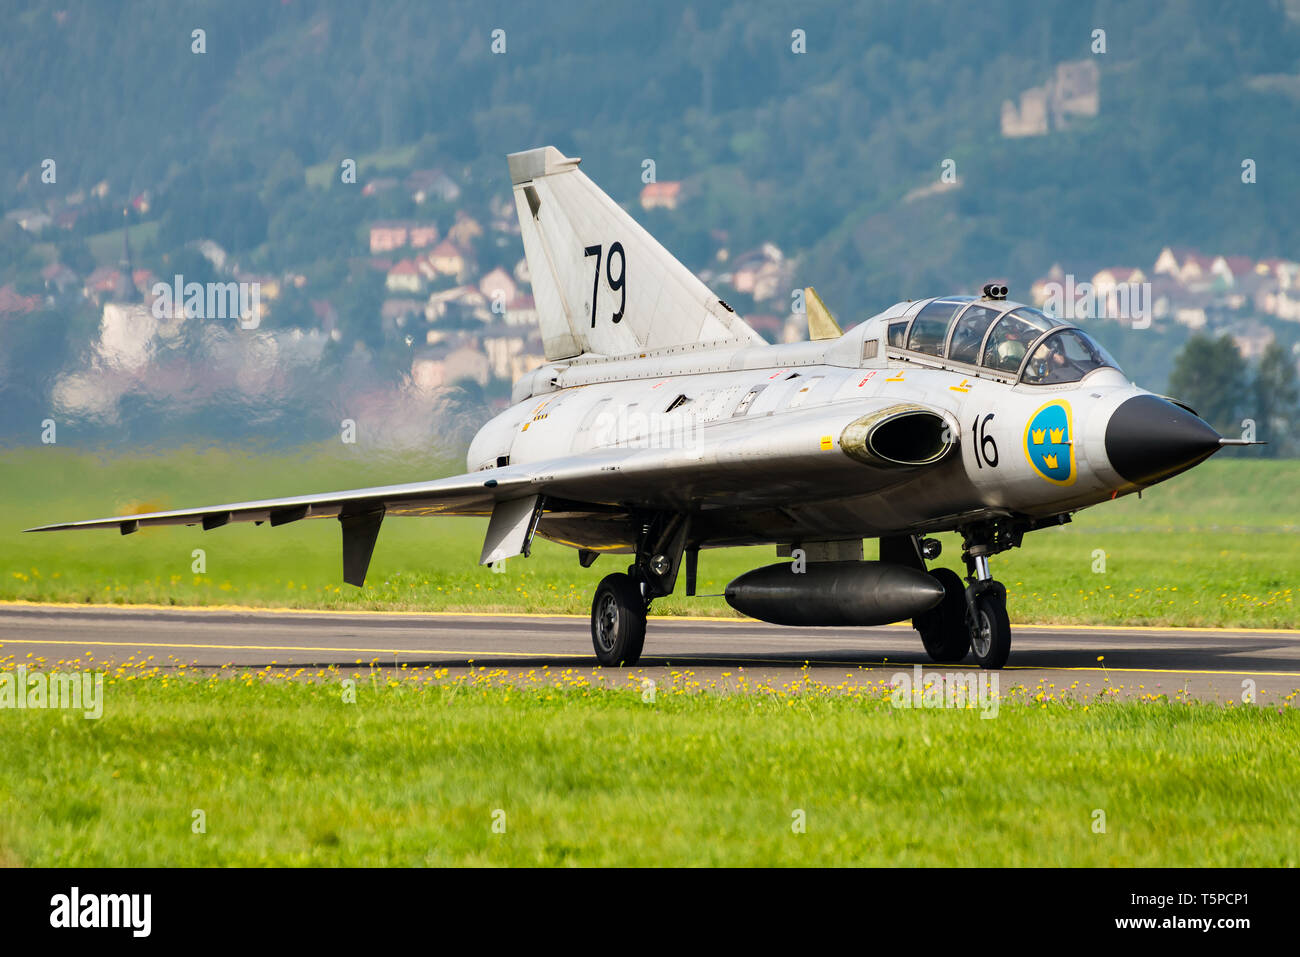 A Saab 35 Draken supersonic aircraft of the Swedish Air Force Historic Flight. Stock Photo